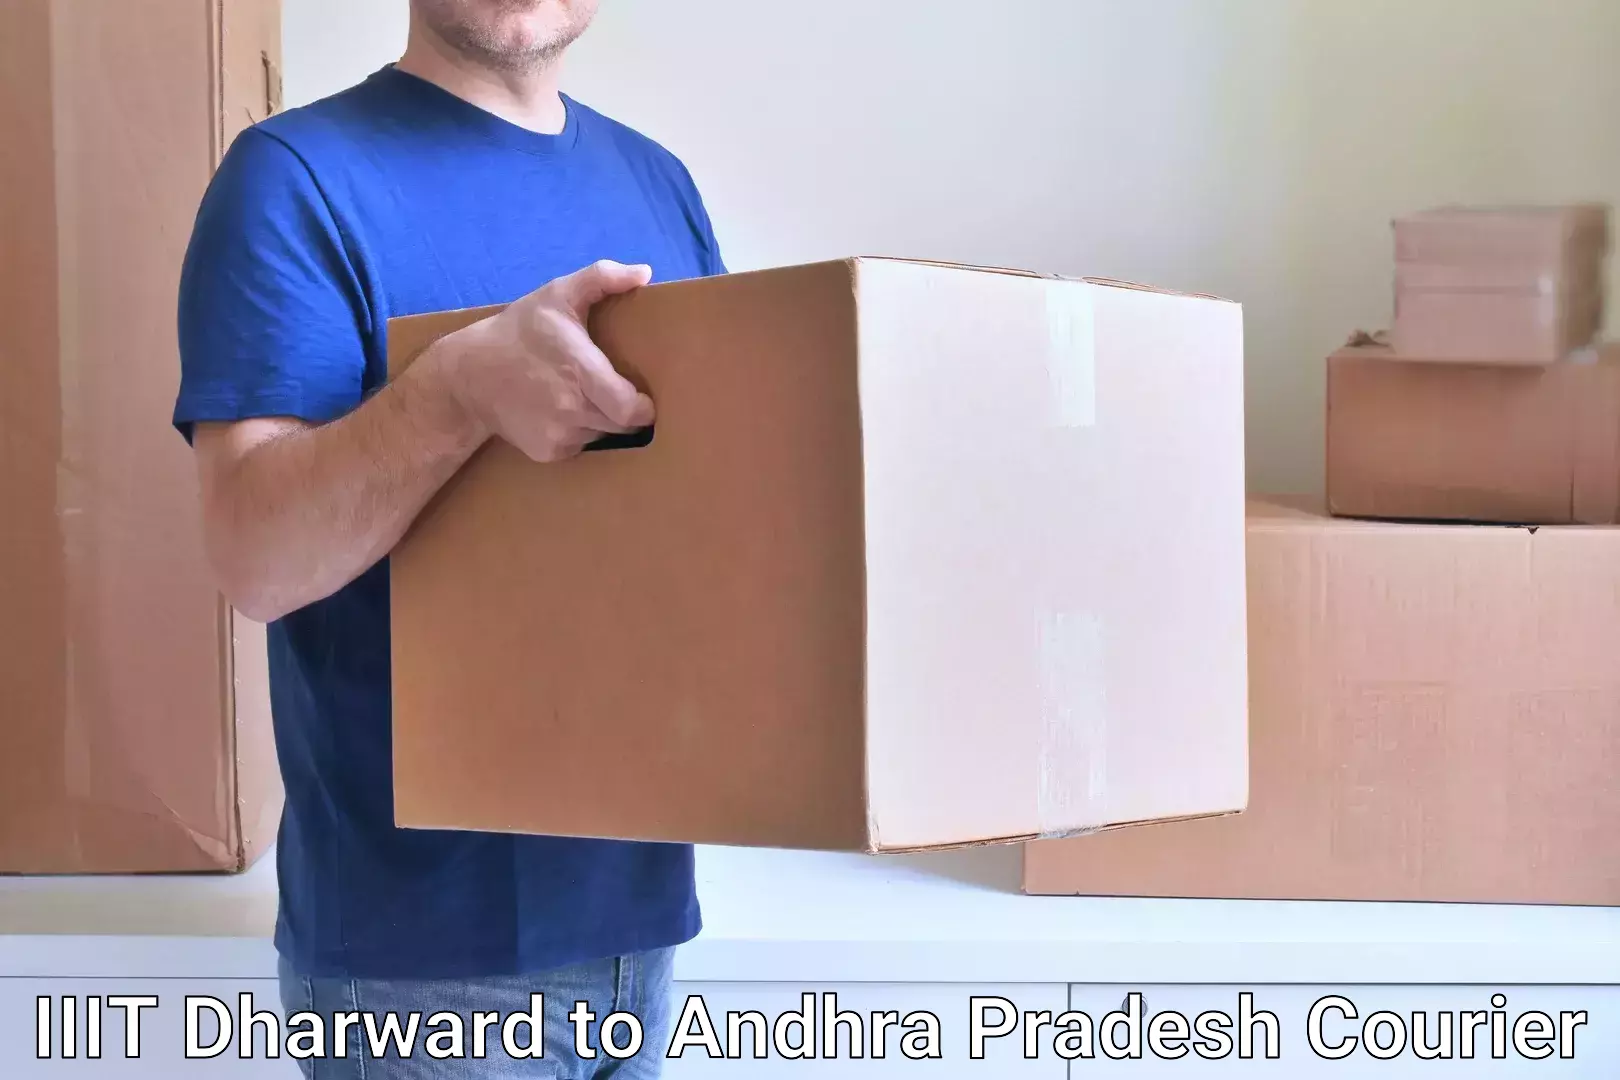 Courier service innovation IIIT Dharward to Andhra Pradesh